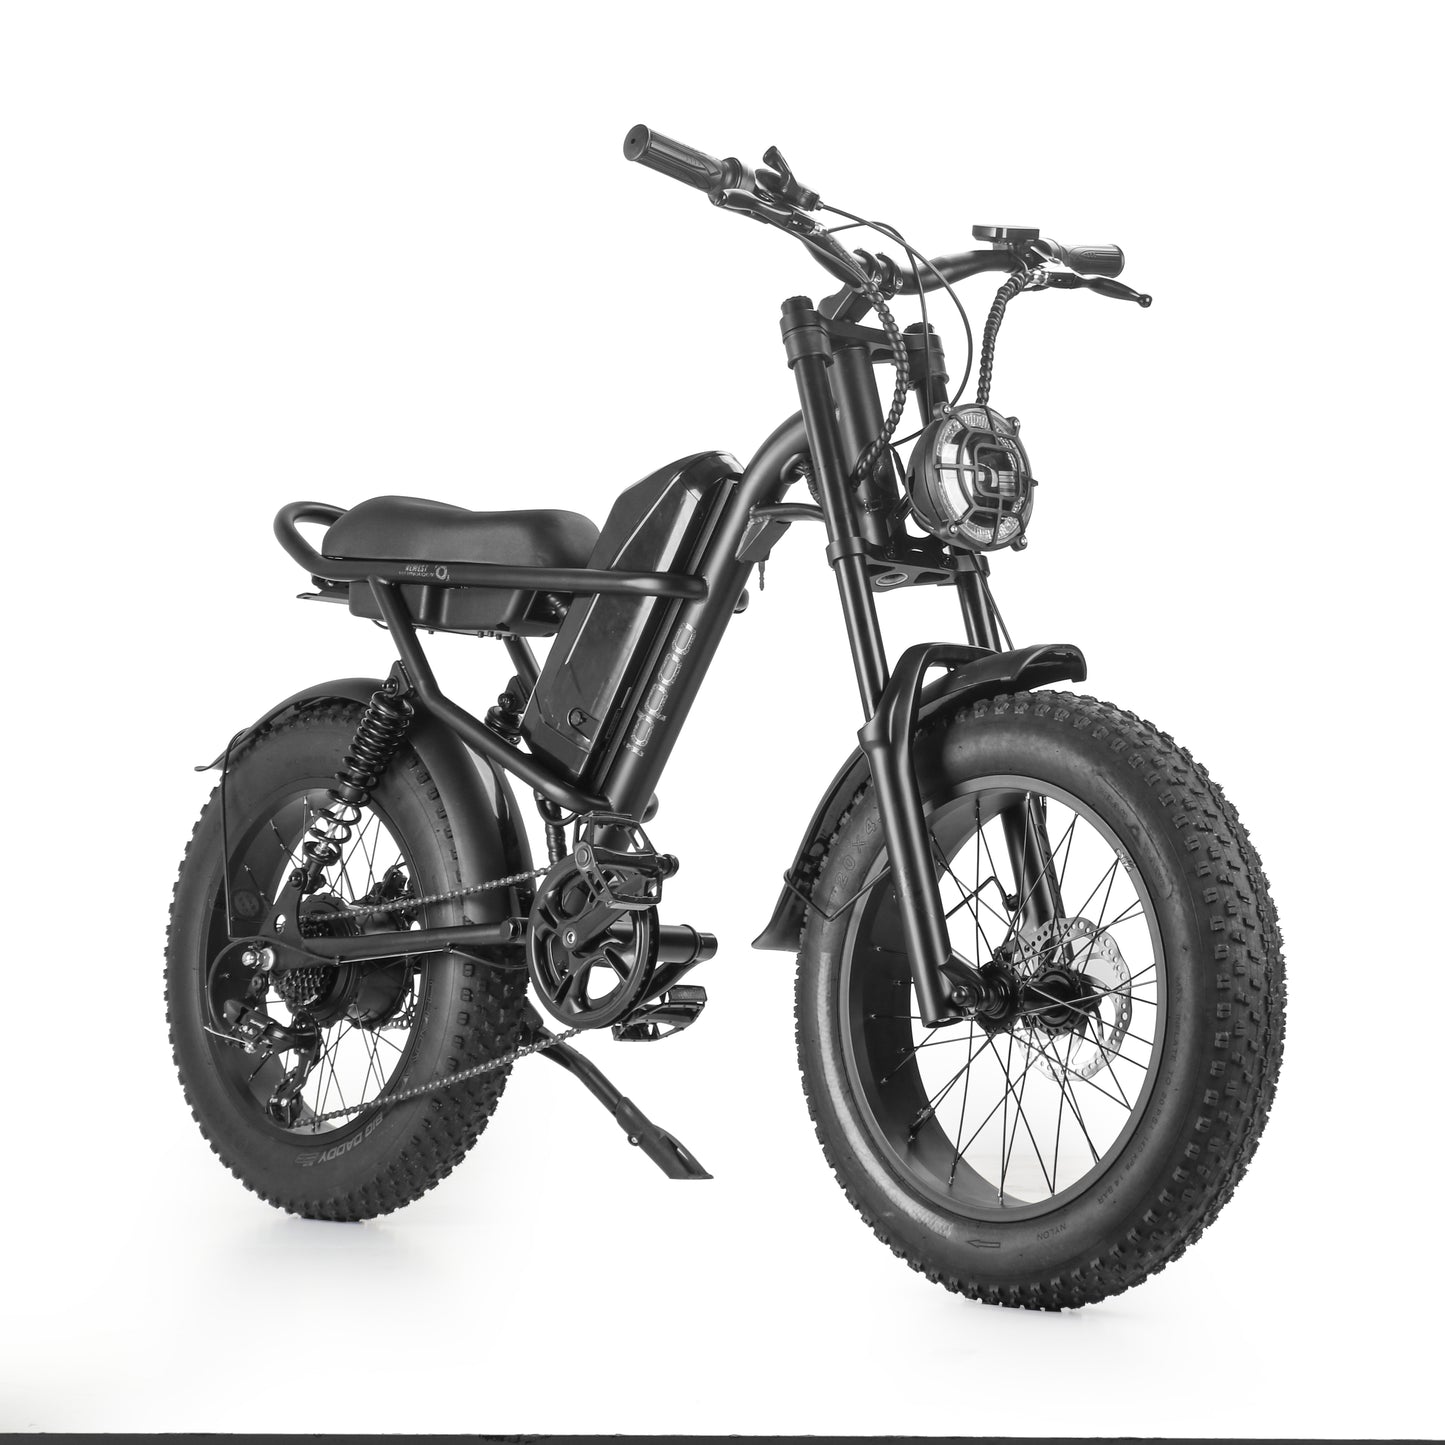 US Warehouse Stock GYL108 20 Inch Wheel Aluminum Alloy Electric Bike with 48V 15AH Battery